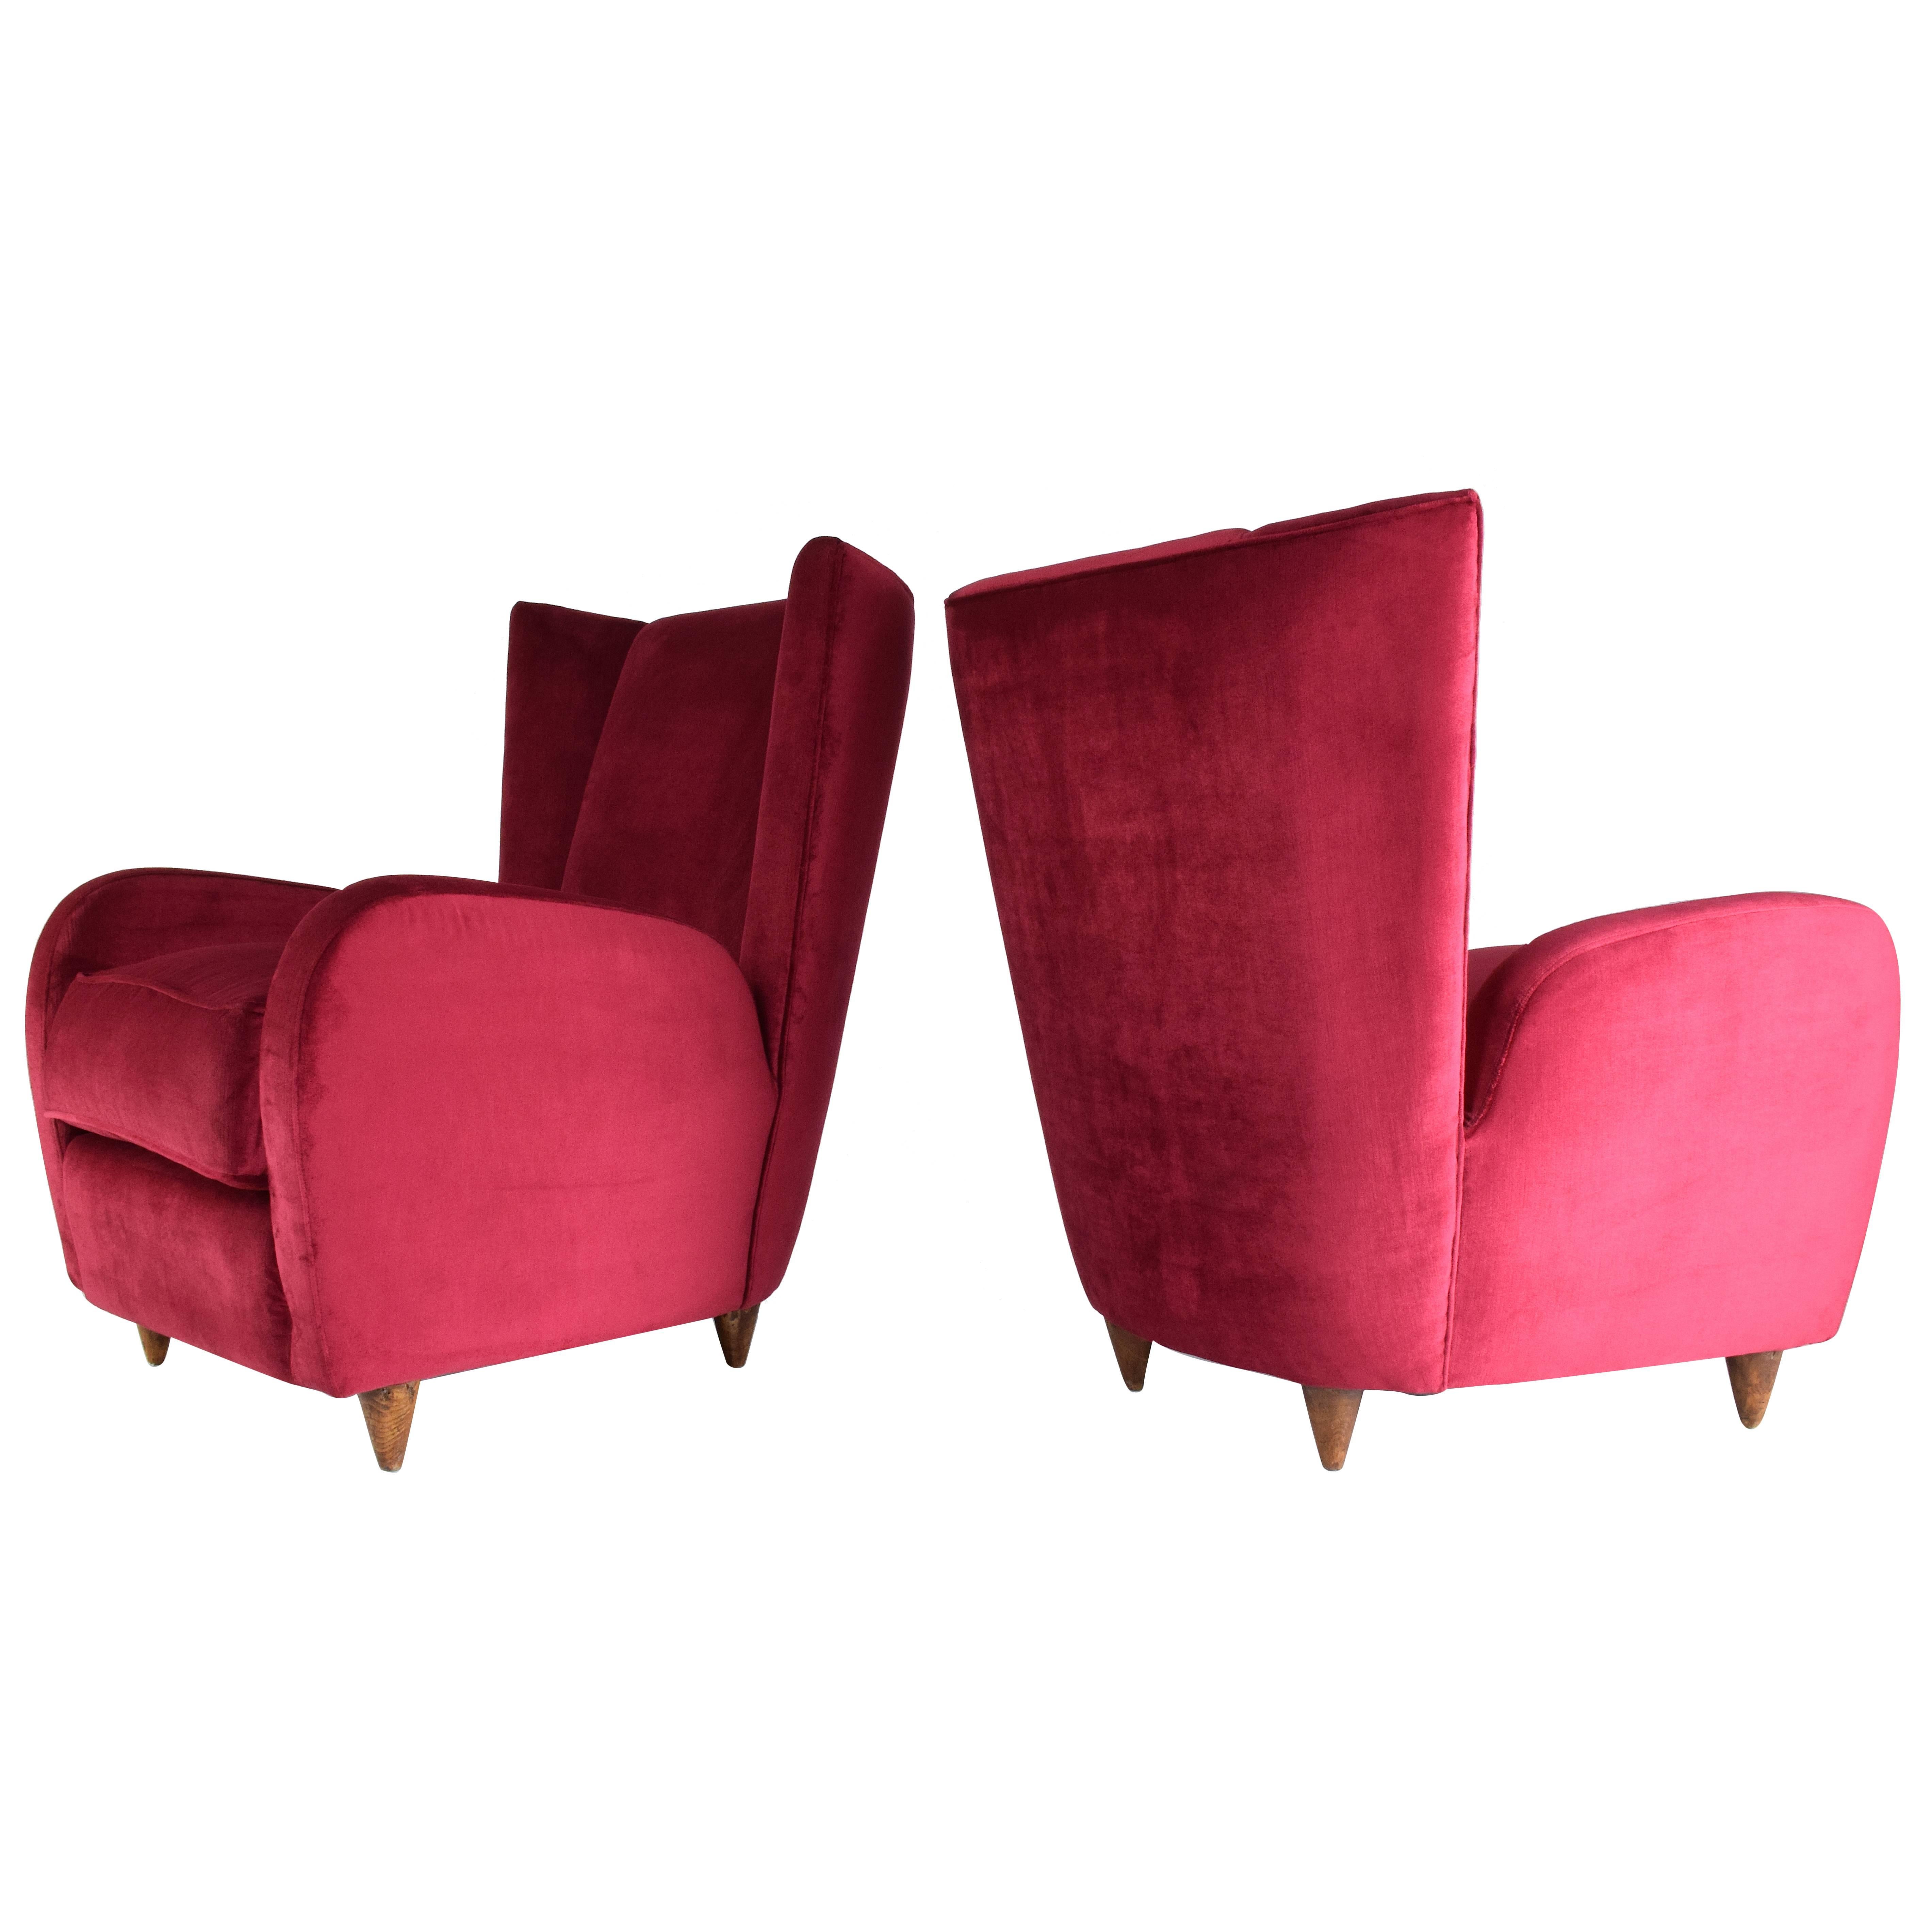 Pair of 20th century vintage Italian curved armchairs by Paolo Buffa in fully restored condition with high backrest and comfortable depth. We have re upholstered the chairs using a red Lelièvre Paris velvet, one of the highest quality fabric makers